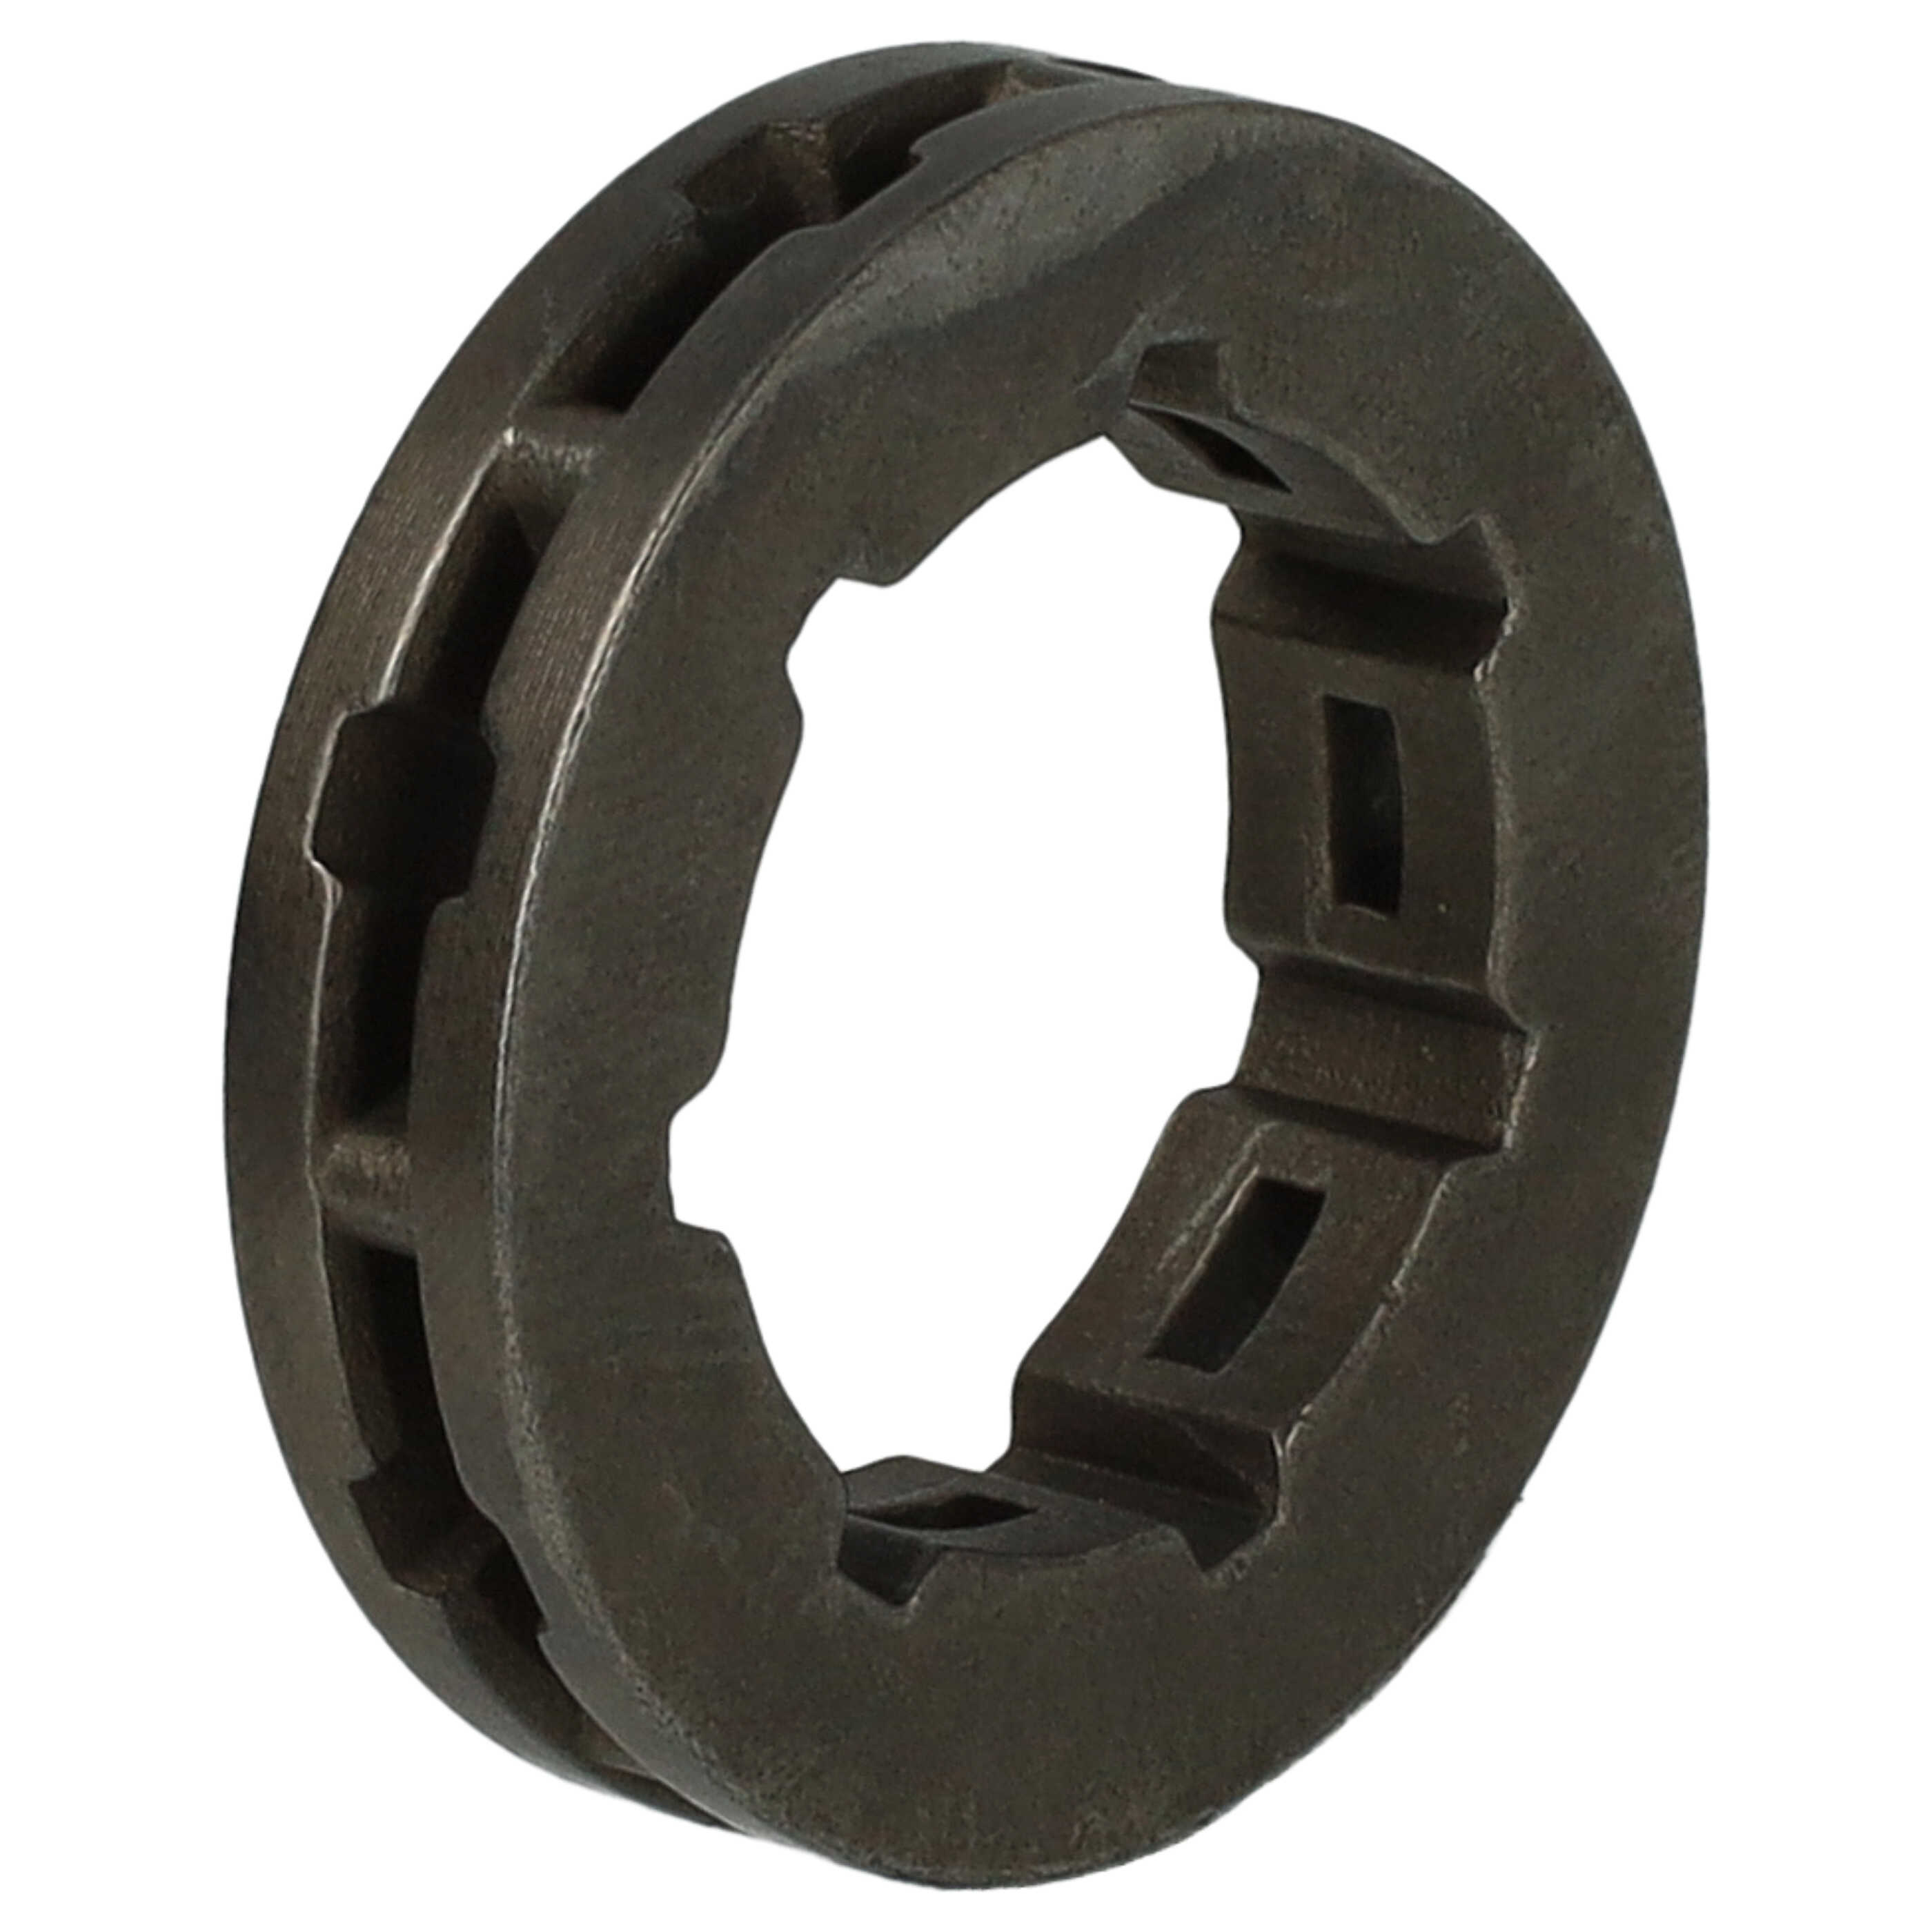 Reduction Ring suitable for Stihl MS 341 Chainsaw etc. - Rim Sprocket, Chain Wheel 